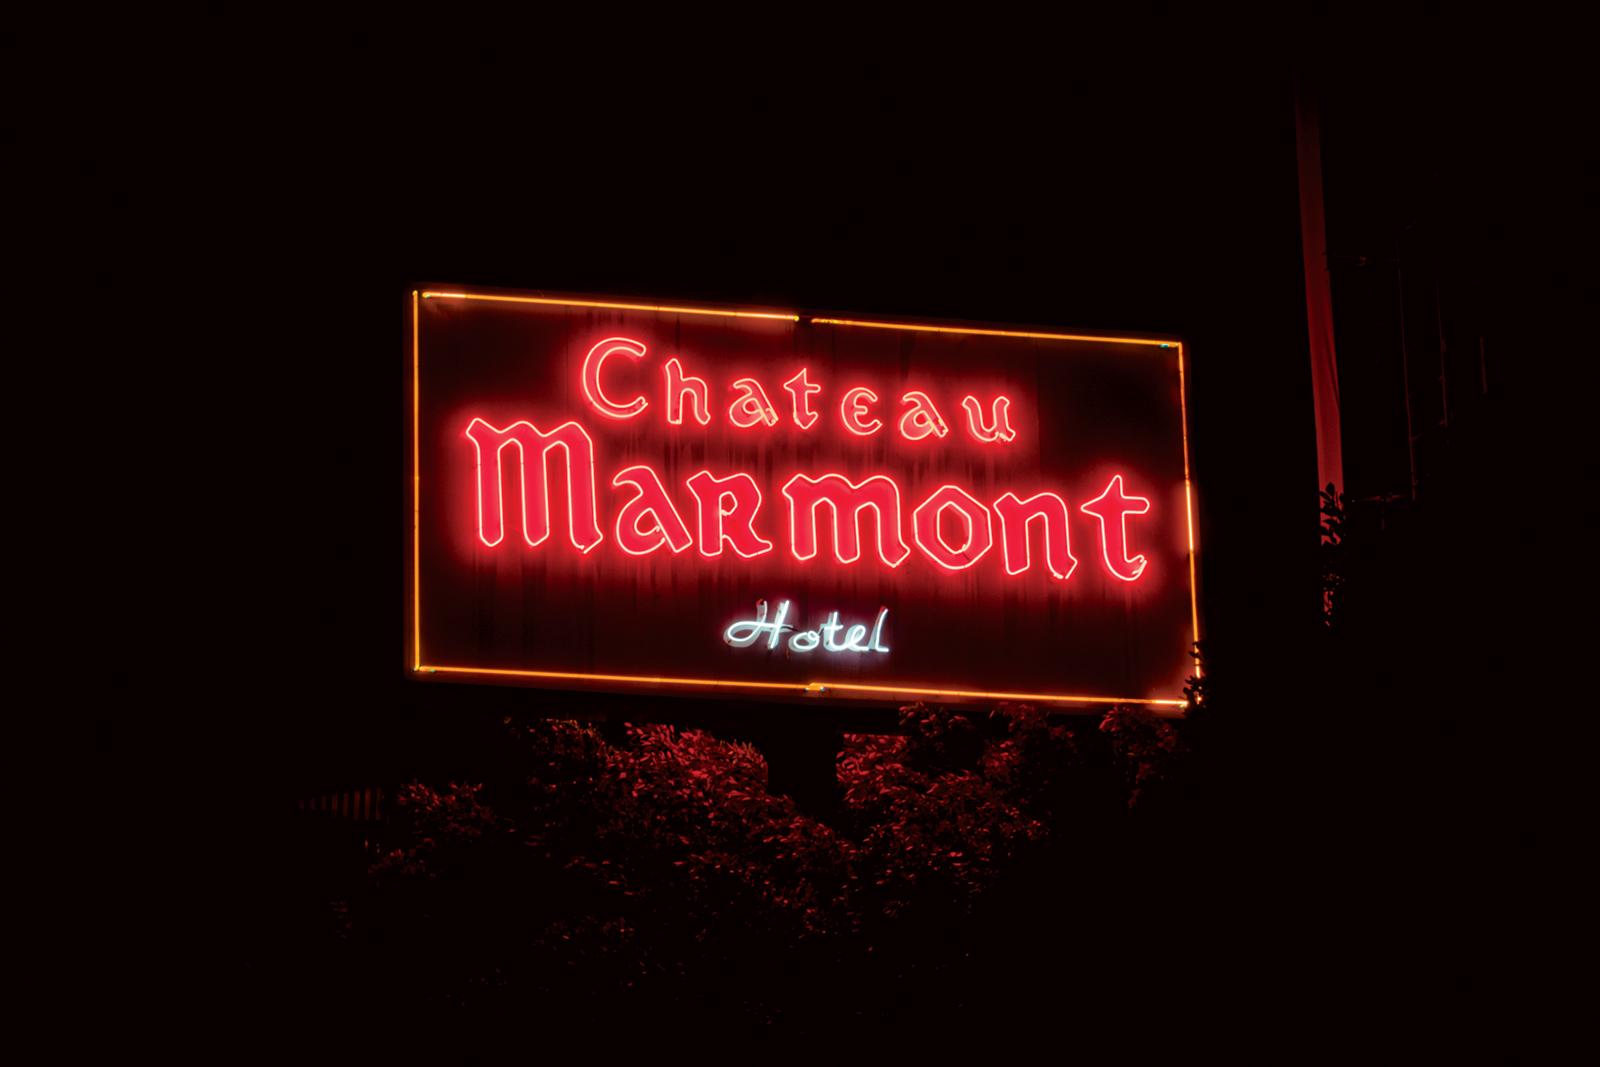 "Chateau Marmont" Photography 30" x 40" inch Edition of 5 by Oleg Char

Medium: Hahnemühle Baryta Paper
Not framed. Ships in a tube. 

Other sizes available: 	
Edition of 5:	30" x 40" inch
Edition of 20:	14.5" x 20" inch

“The Beverly Hills Hotel”